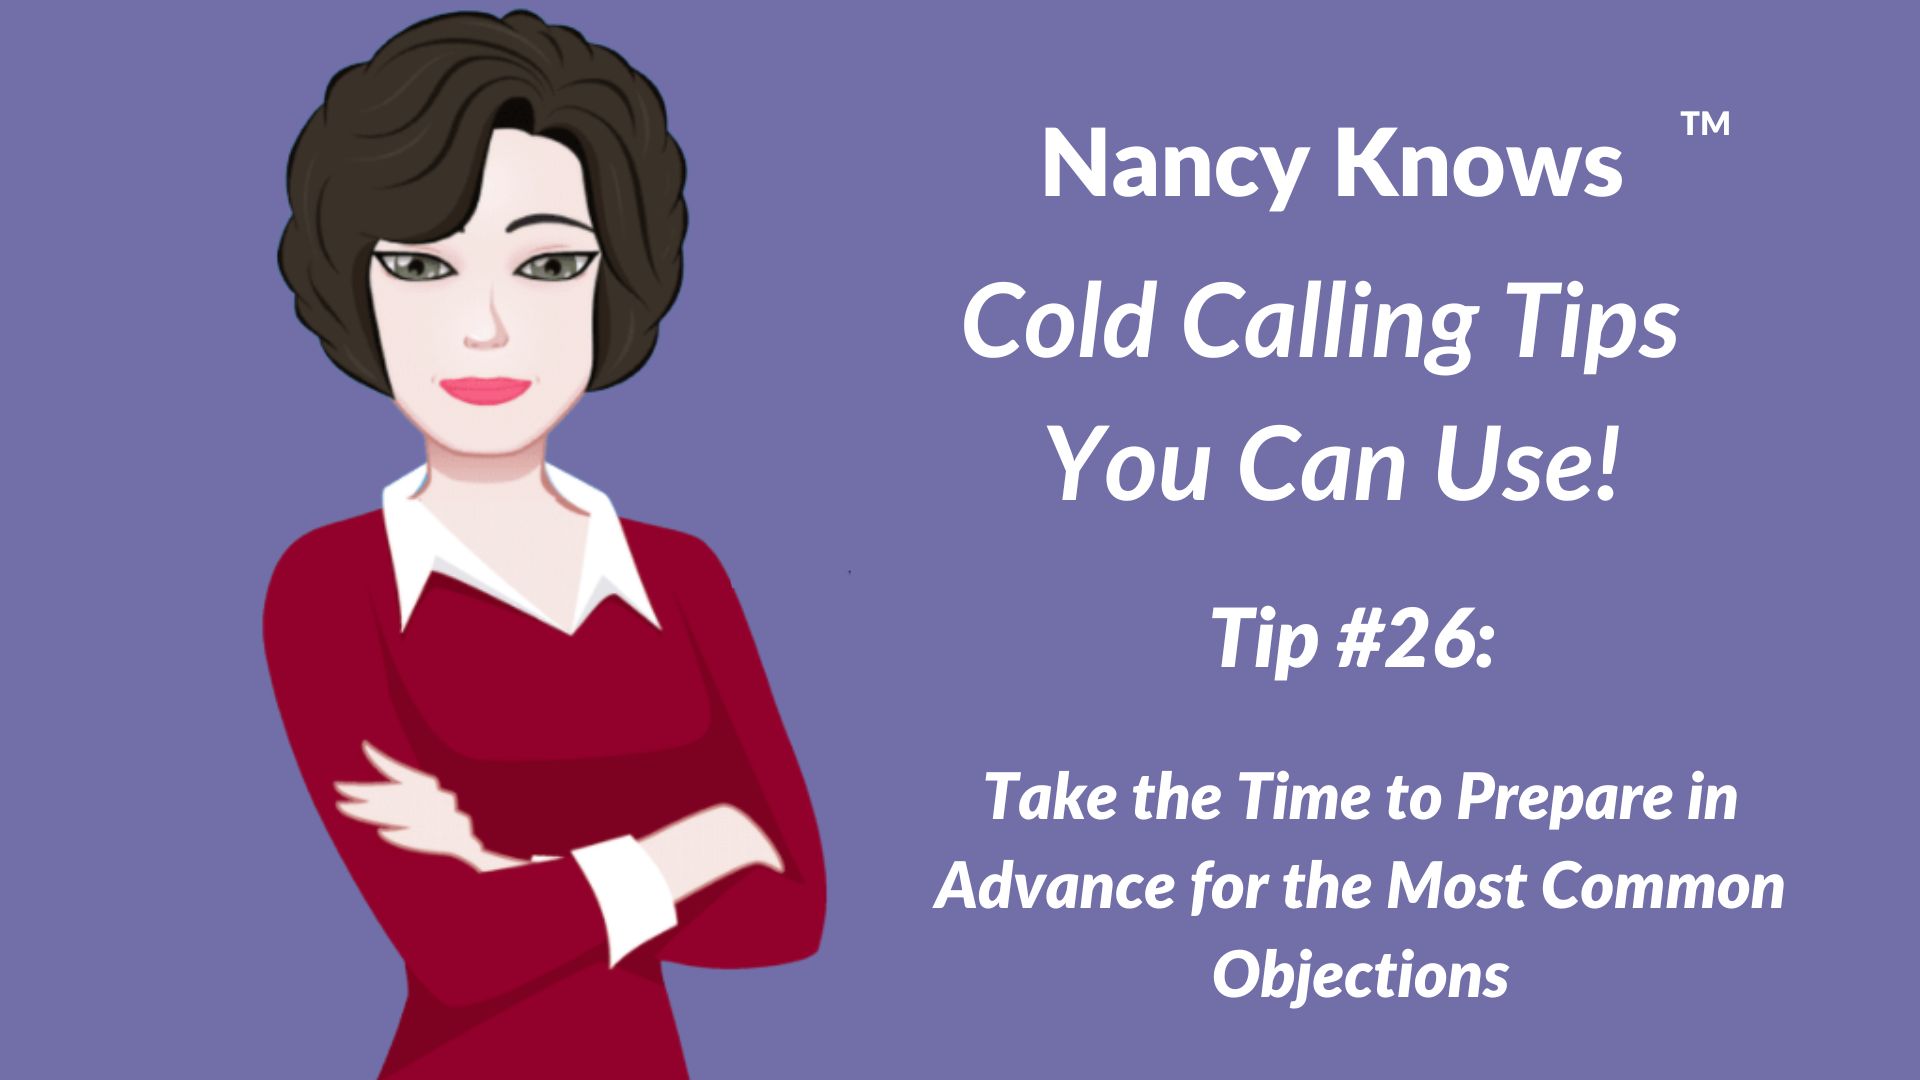 Nancy Knows #26: Take the Time to Prepare in Advance for the Most Common Objections